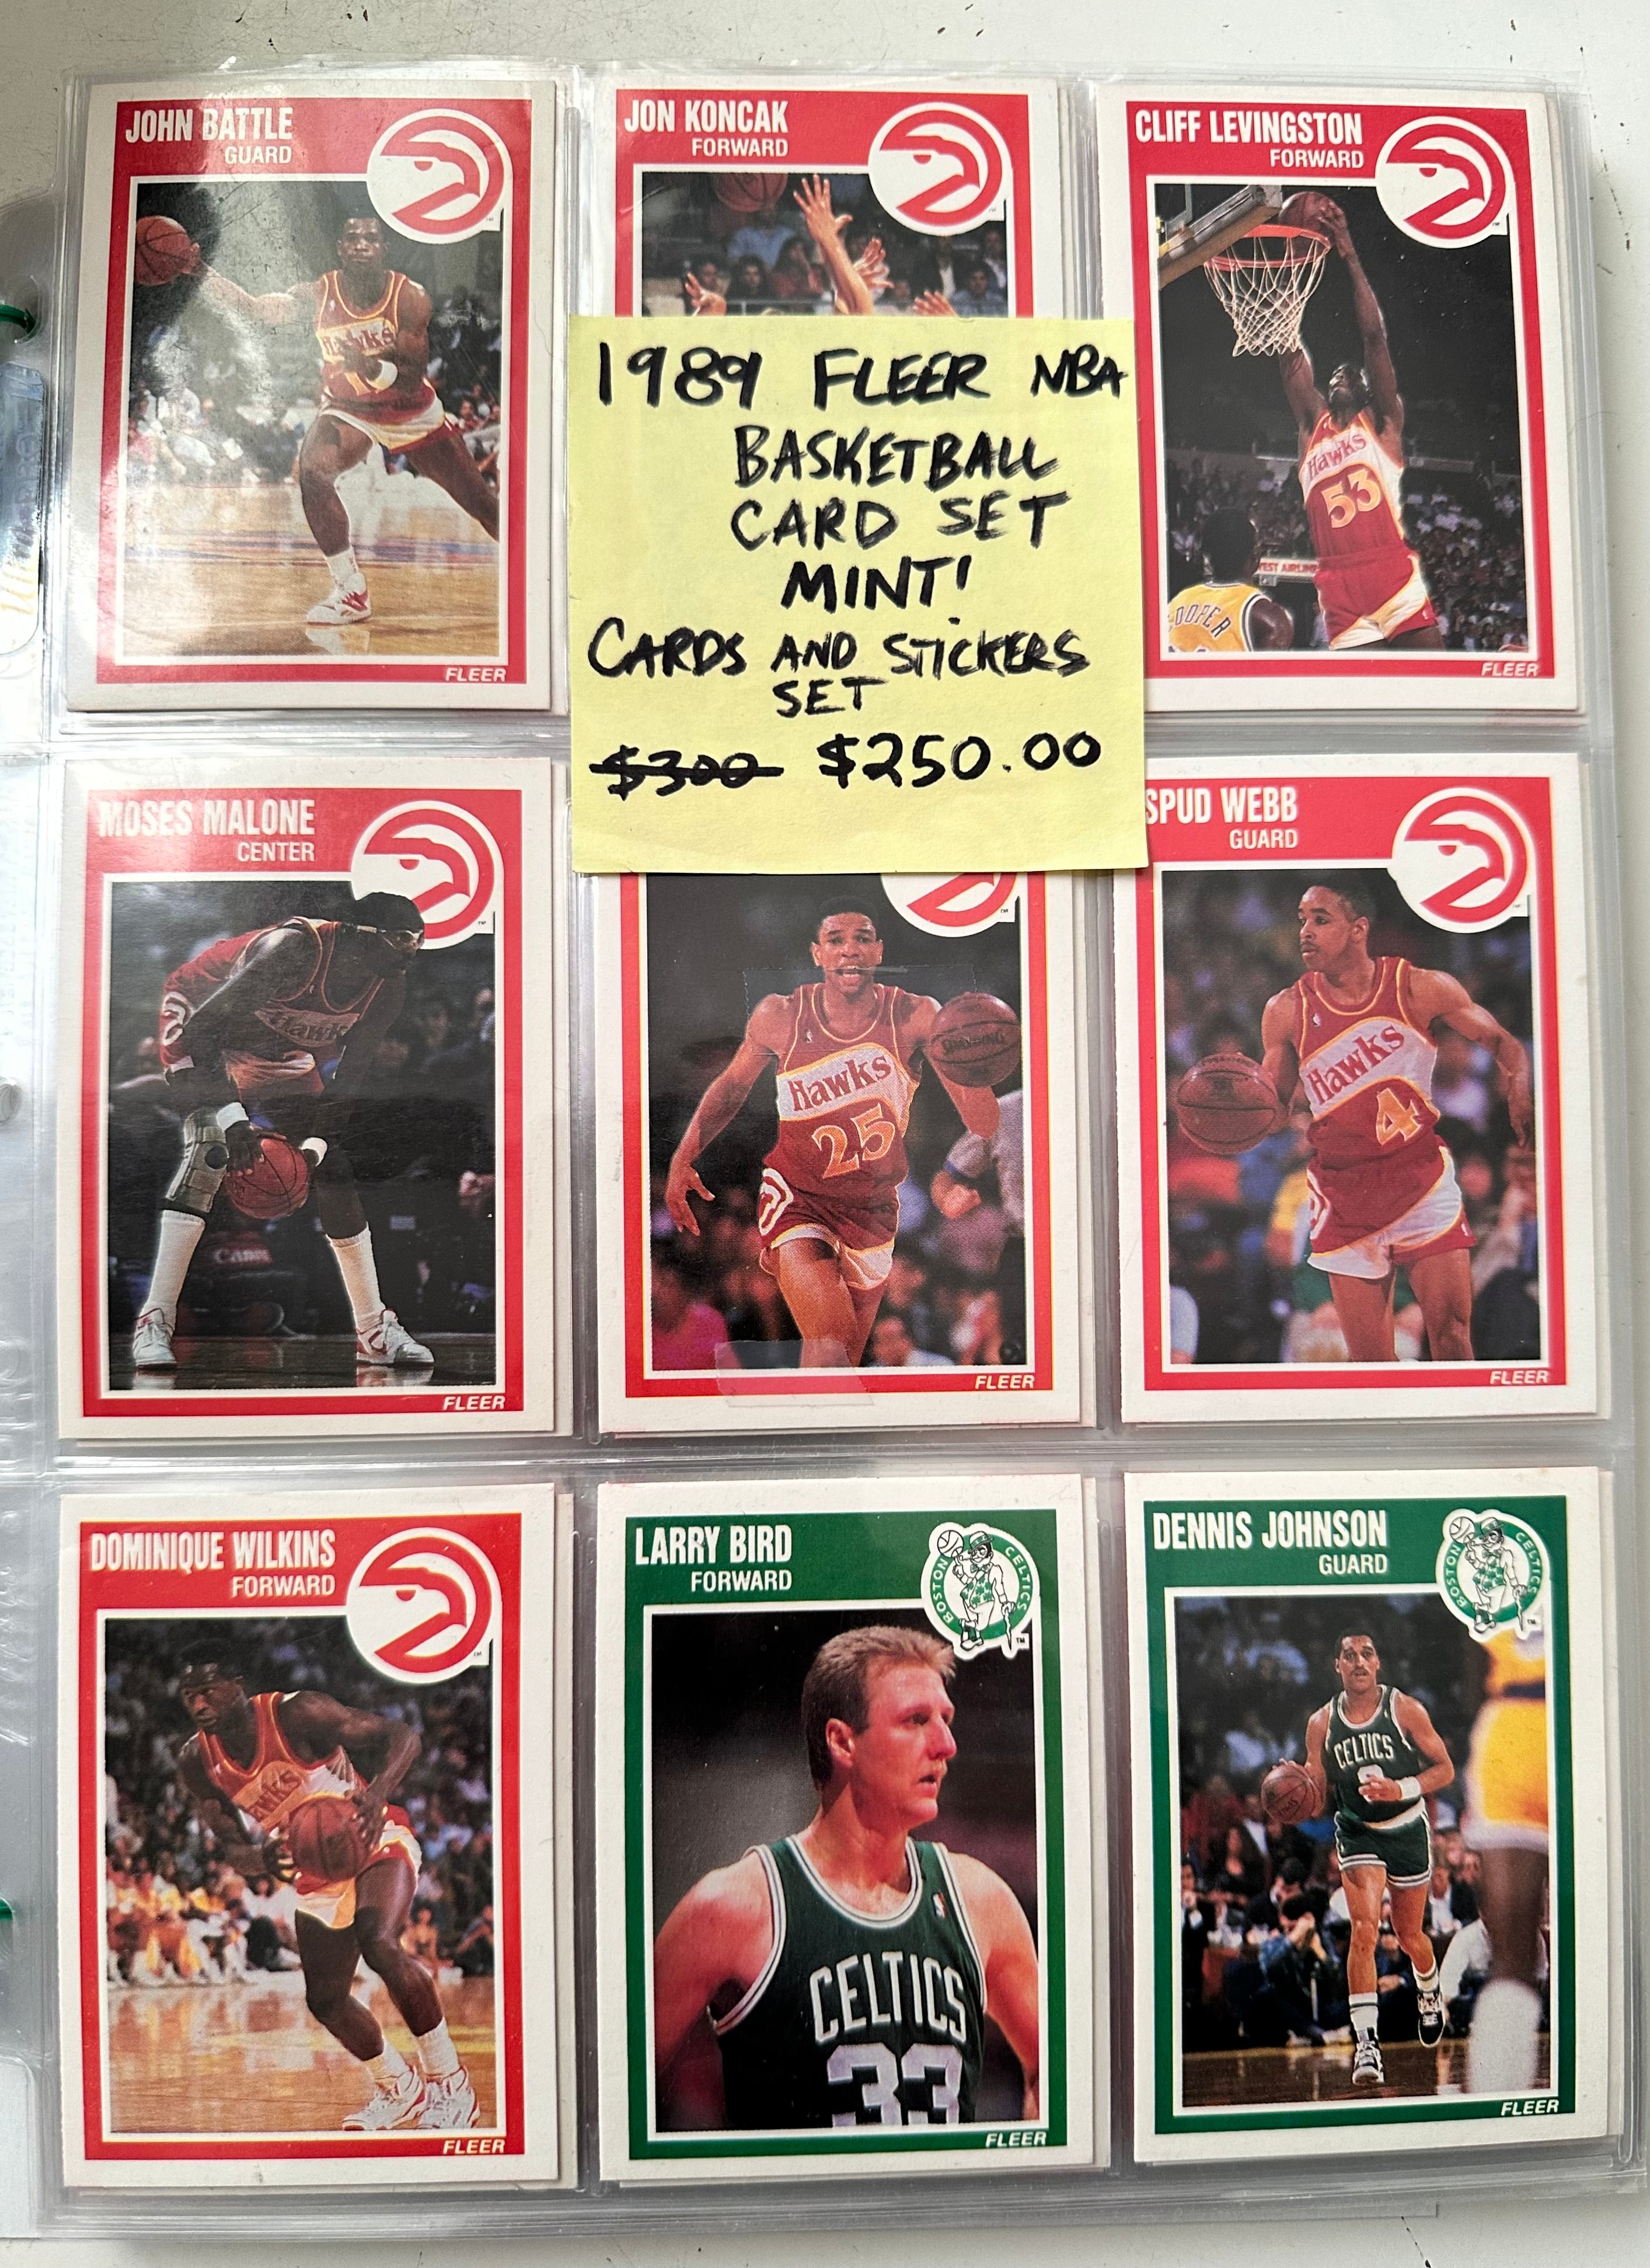 1989 Fleer Basketball cards and stickers set in pages